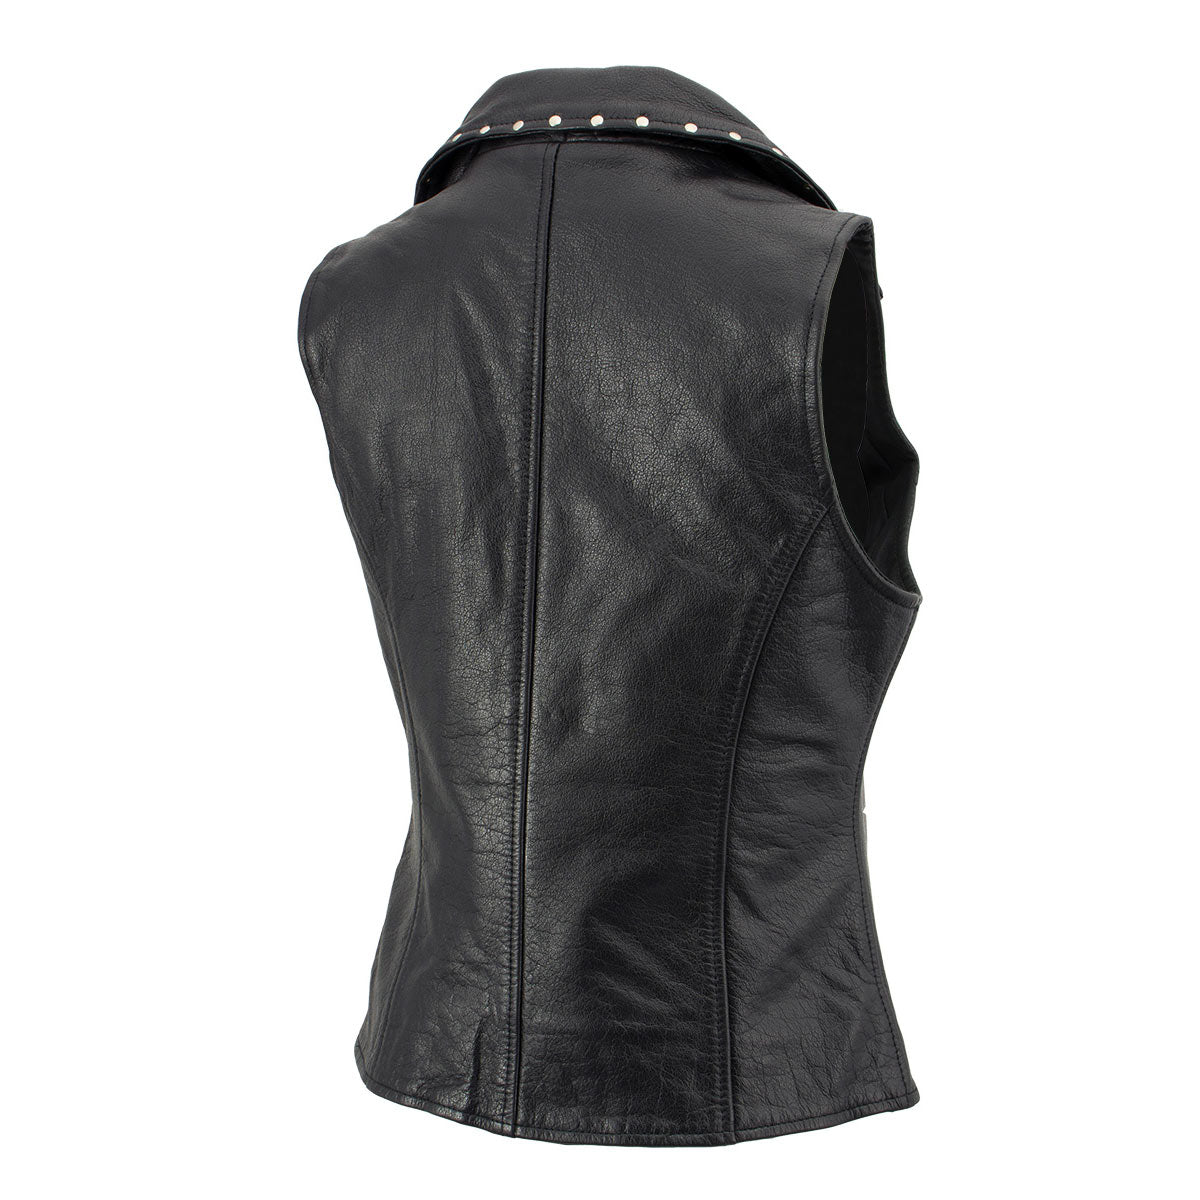 Xelement XS1028 Women's 'Dita' Black Motorcycle Leather Vest with Riveted Lapel Collar